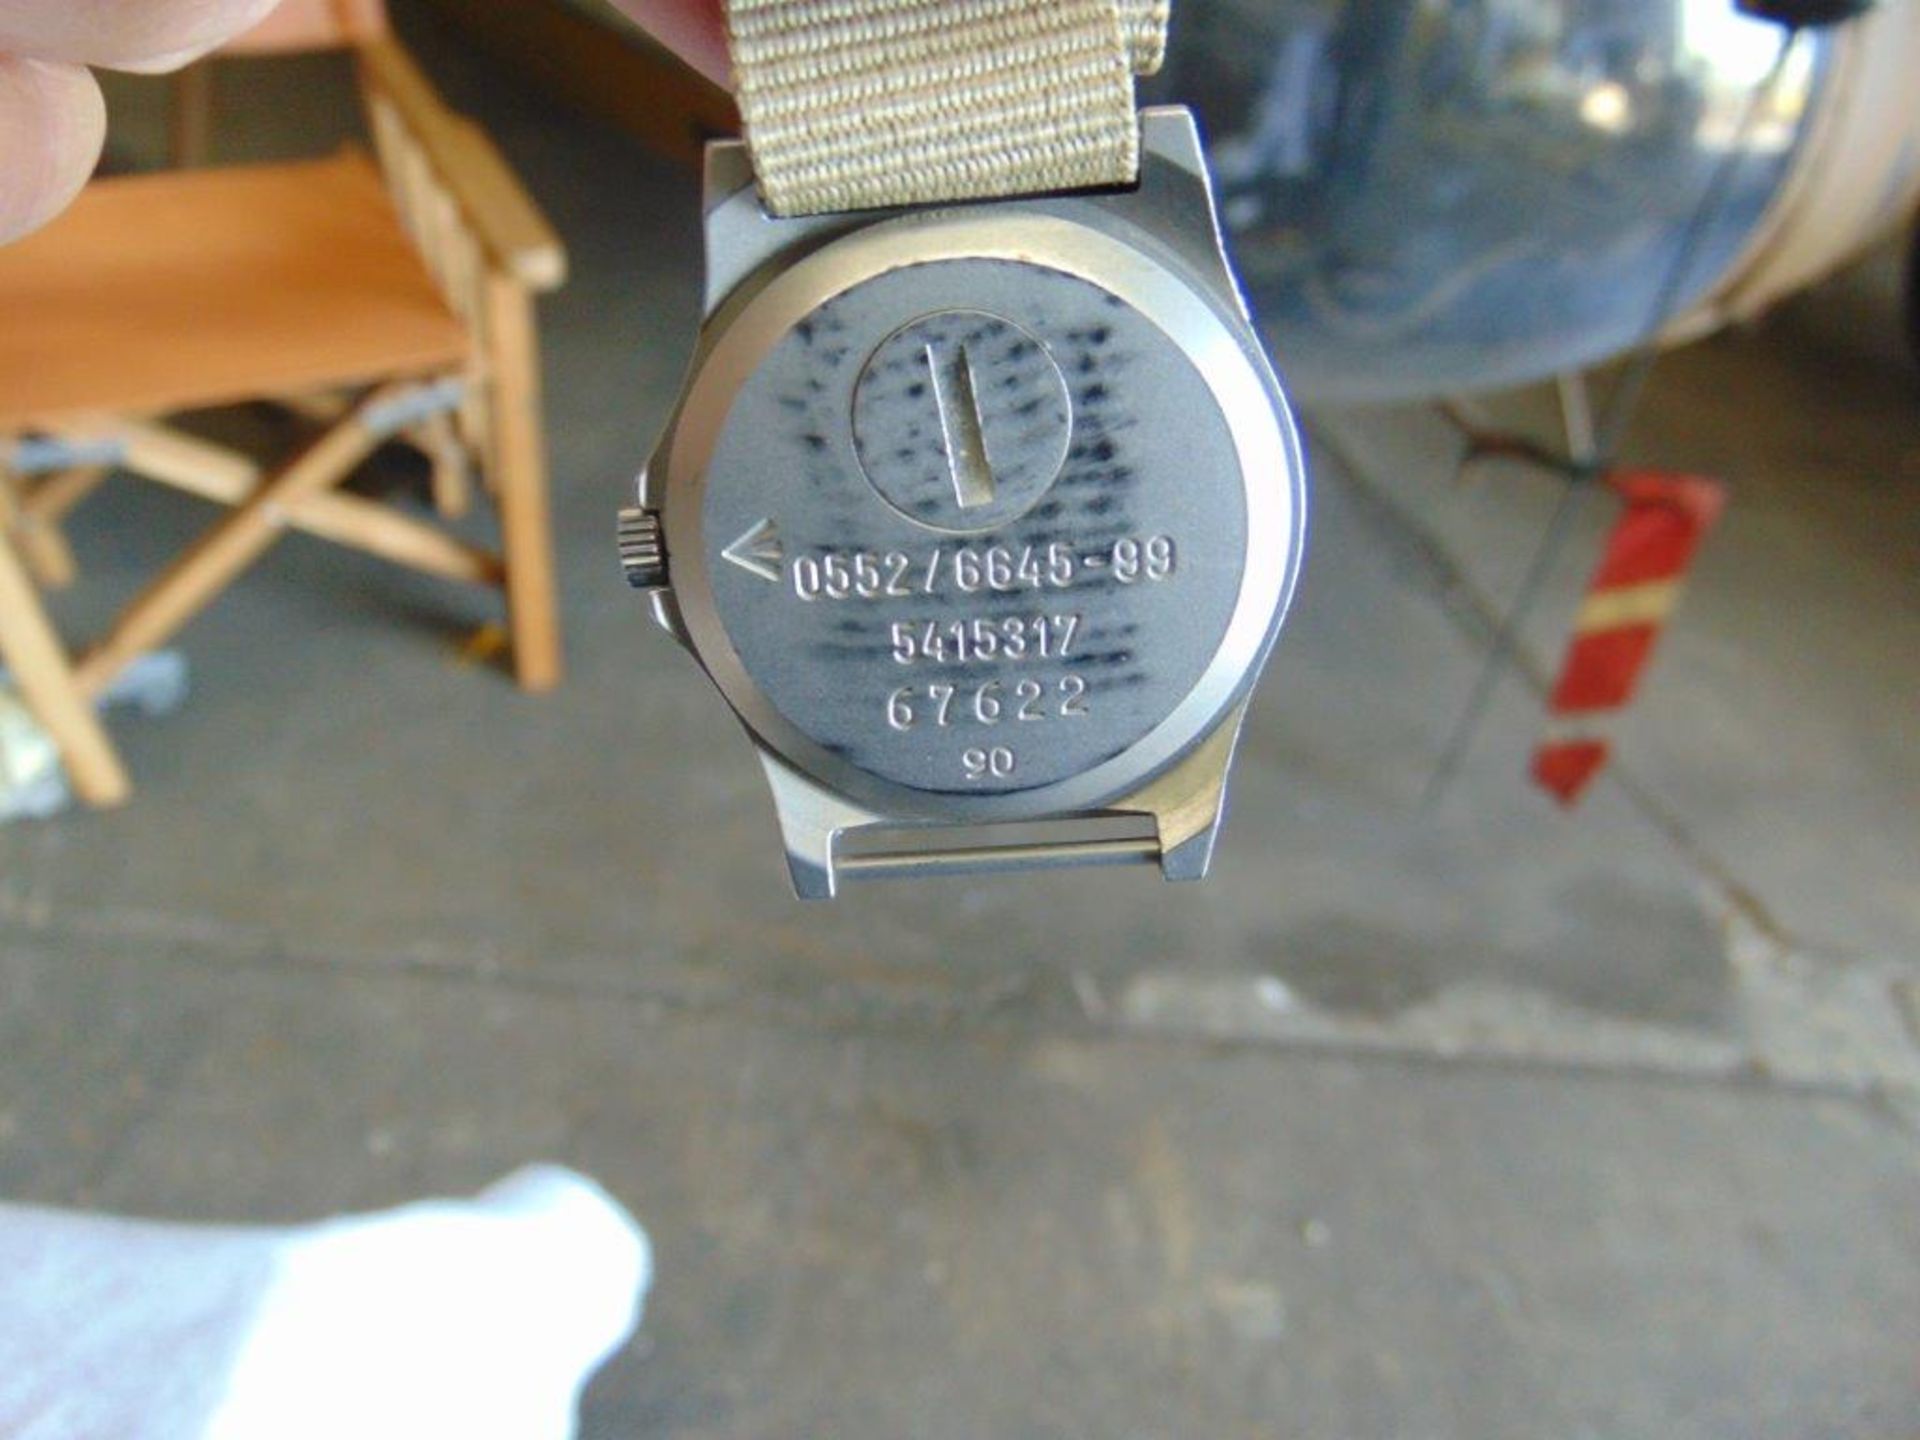 Rare 0552 Royal Marines Issue service watch dated 1990 ( Gulf War ) New Battery and Strap - Image 4 of 4